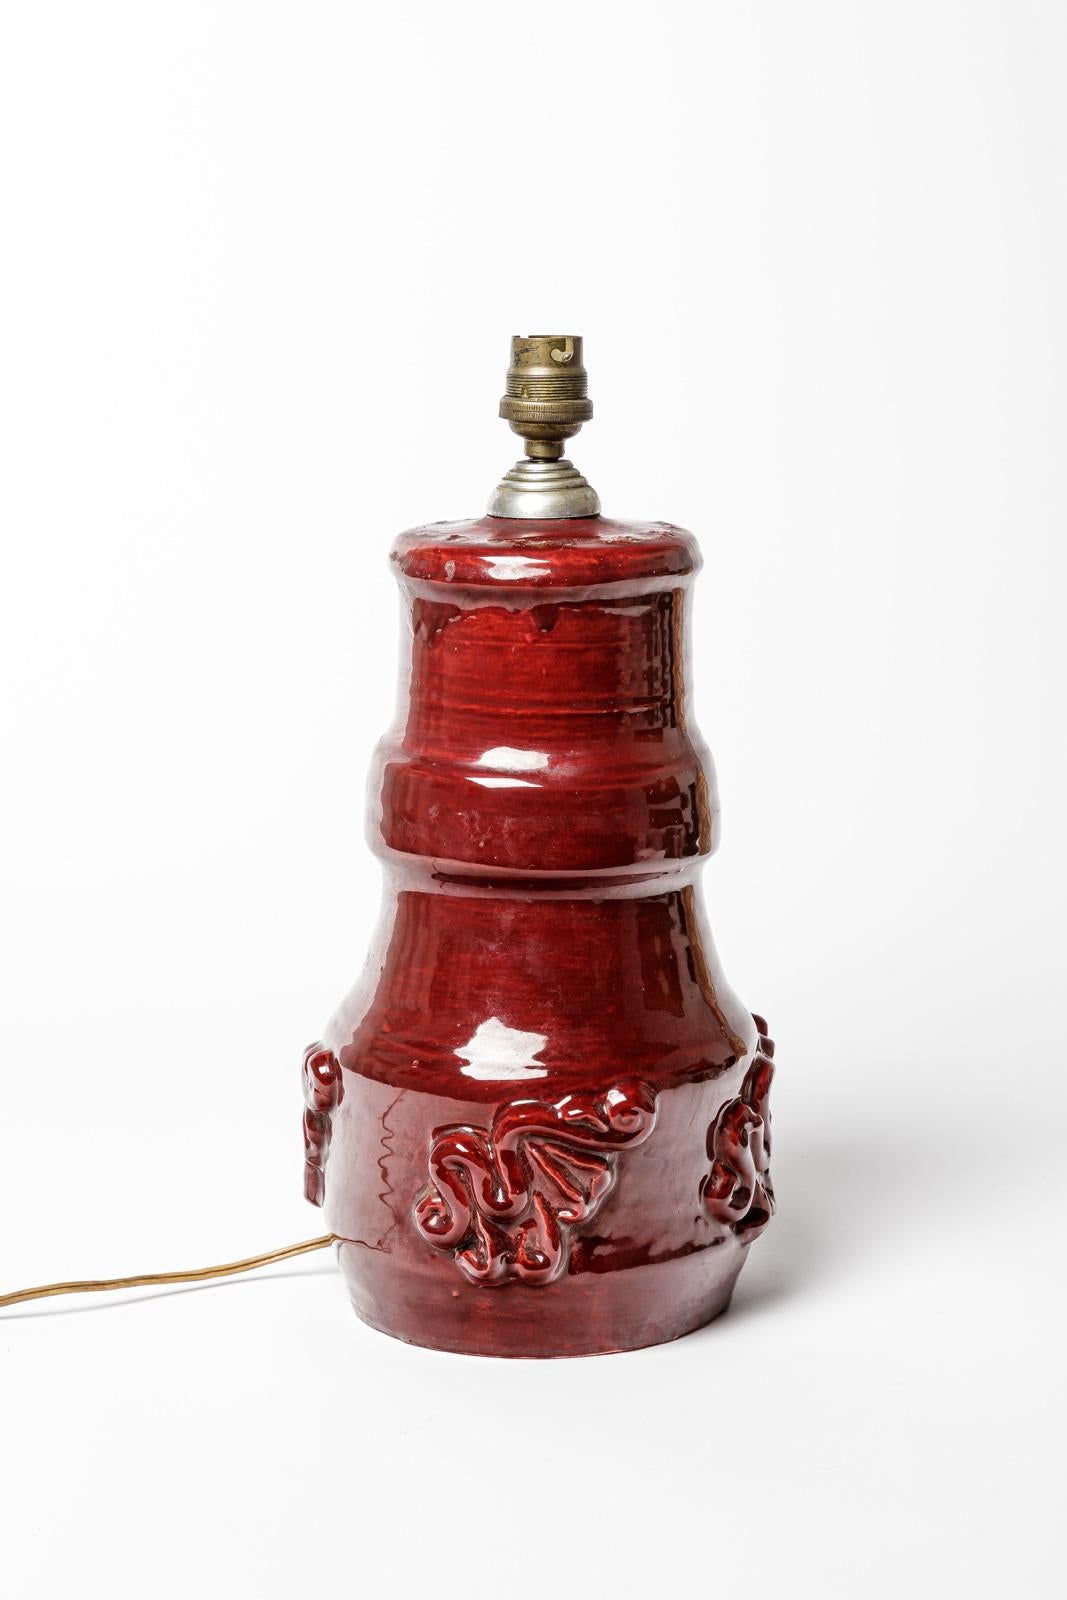 French Circa 1950 large red ceramic table lamp by Jean Austruy 20th century design For Sale